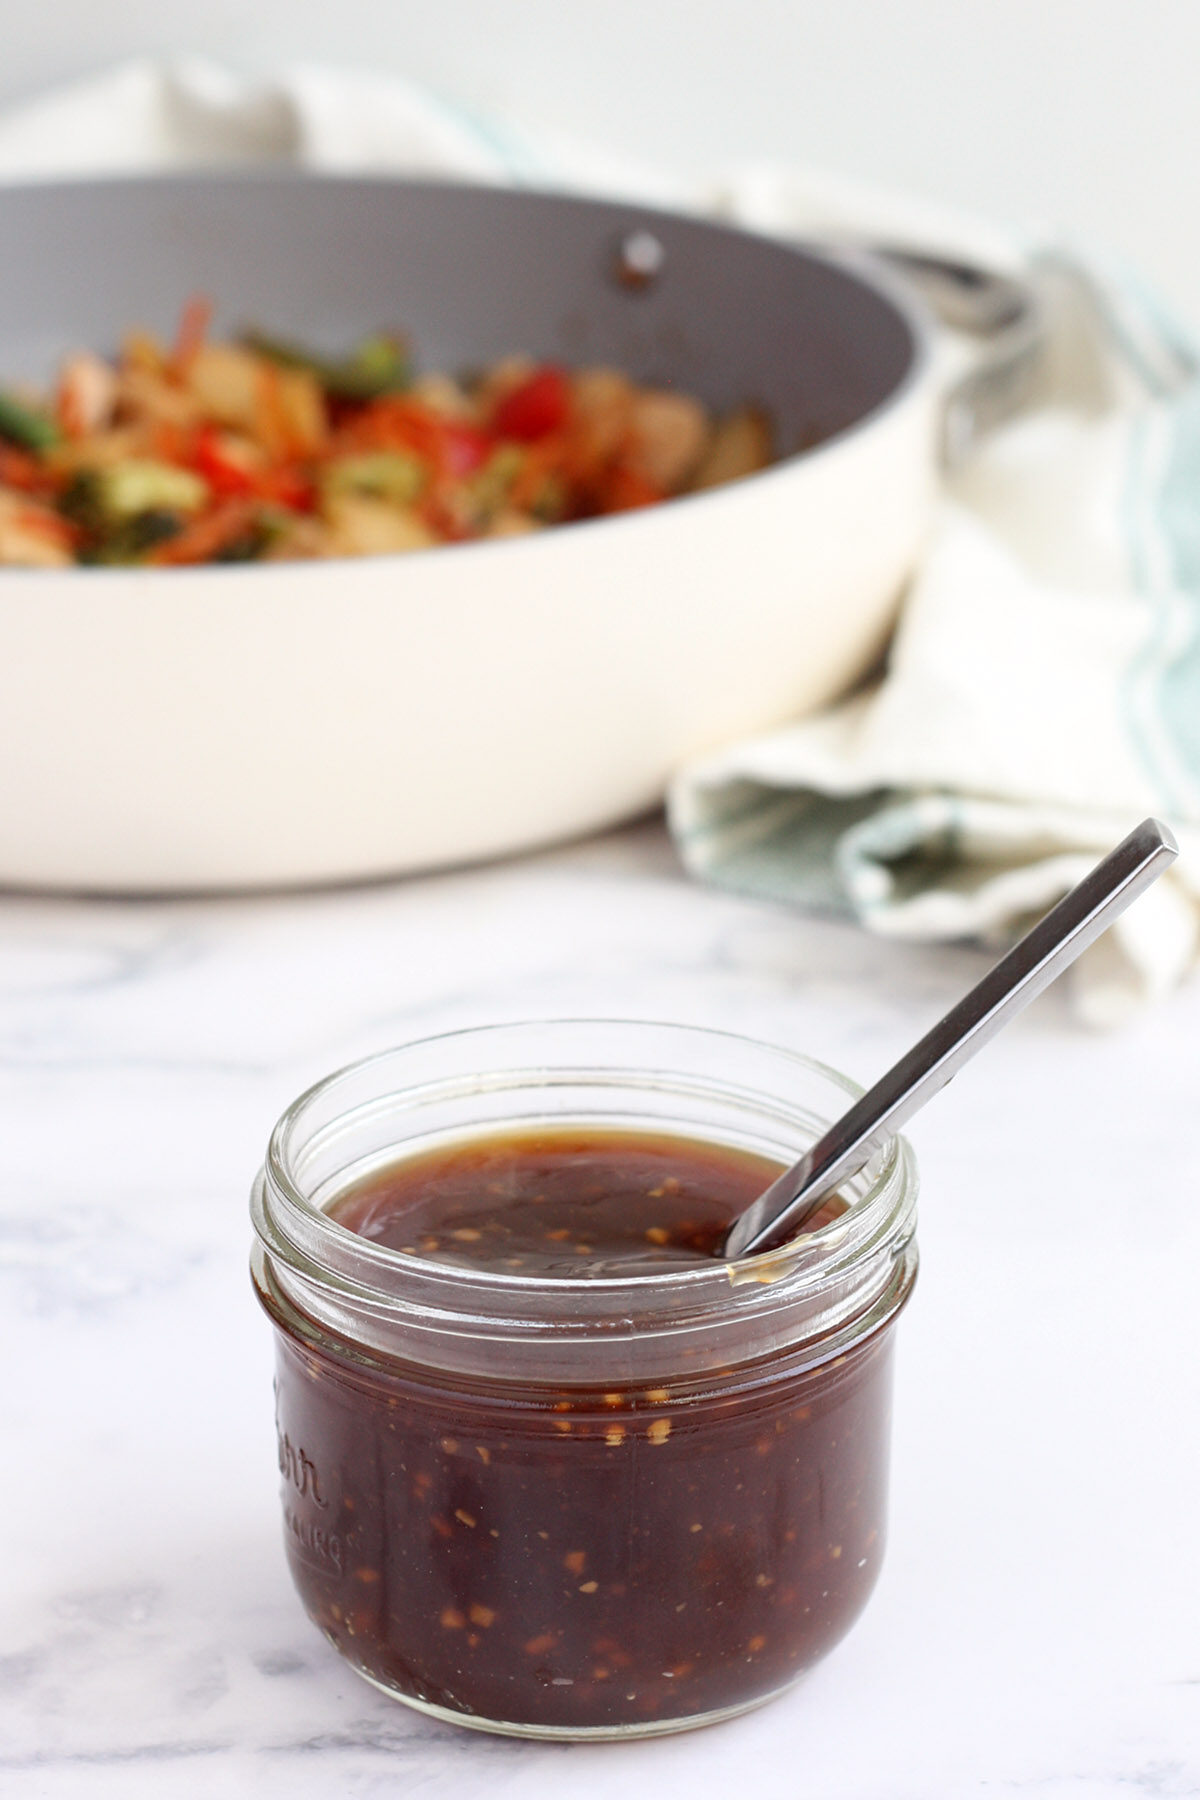 a jar of homemade stir fry sauce with a spoon in front of a stir fry pan